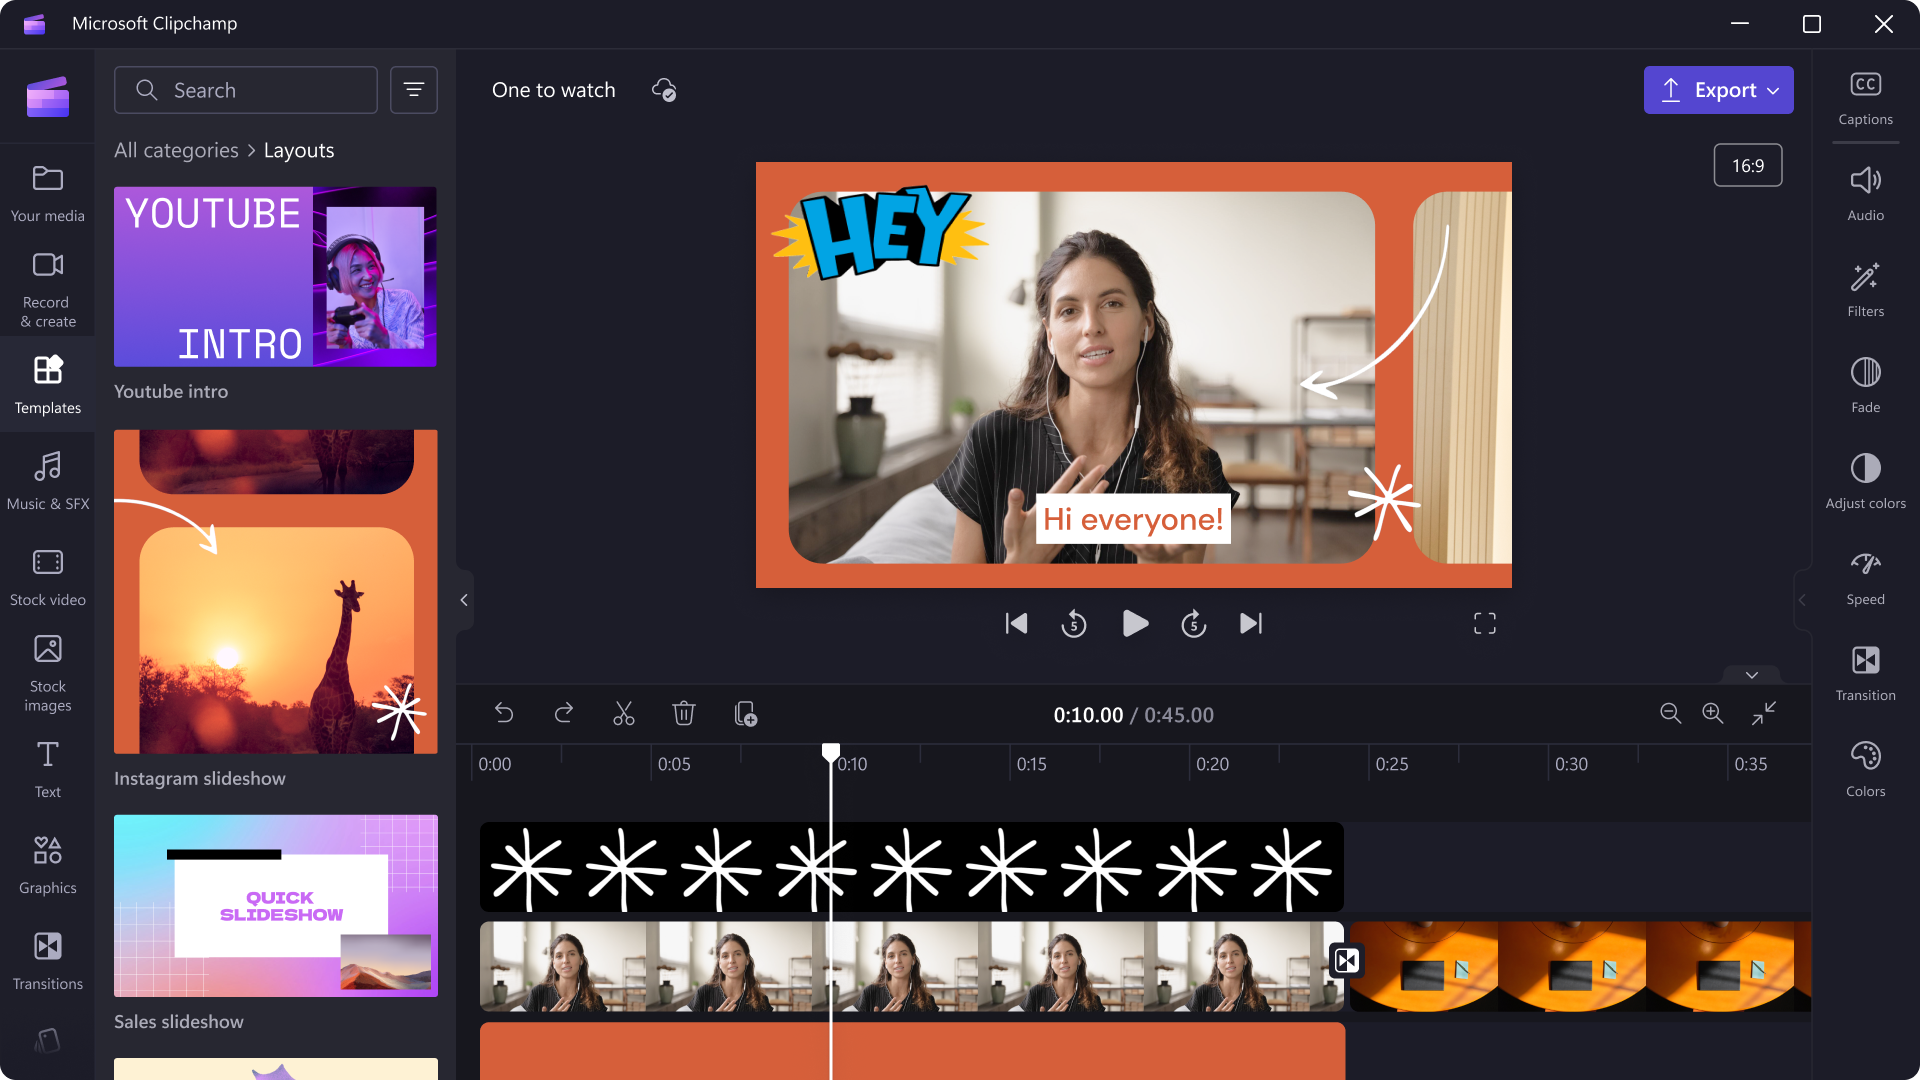 An image of a woman recording a webcam video and adding video effects, stickers and subtitles to her video in Clipchamp video editor